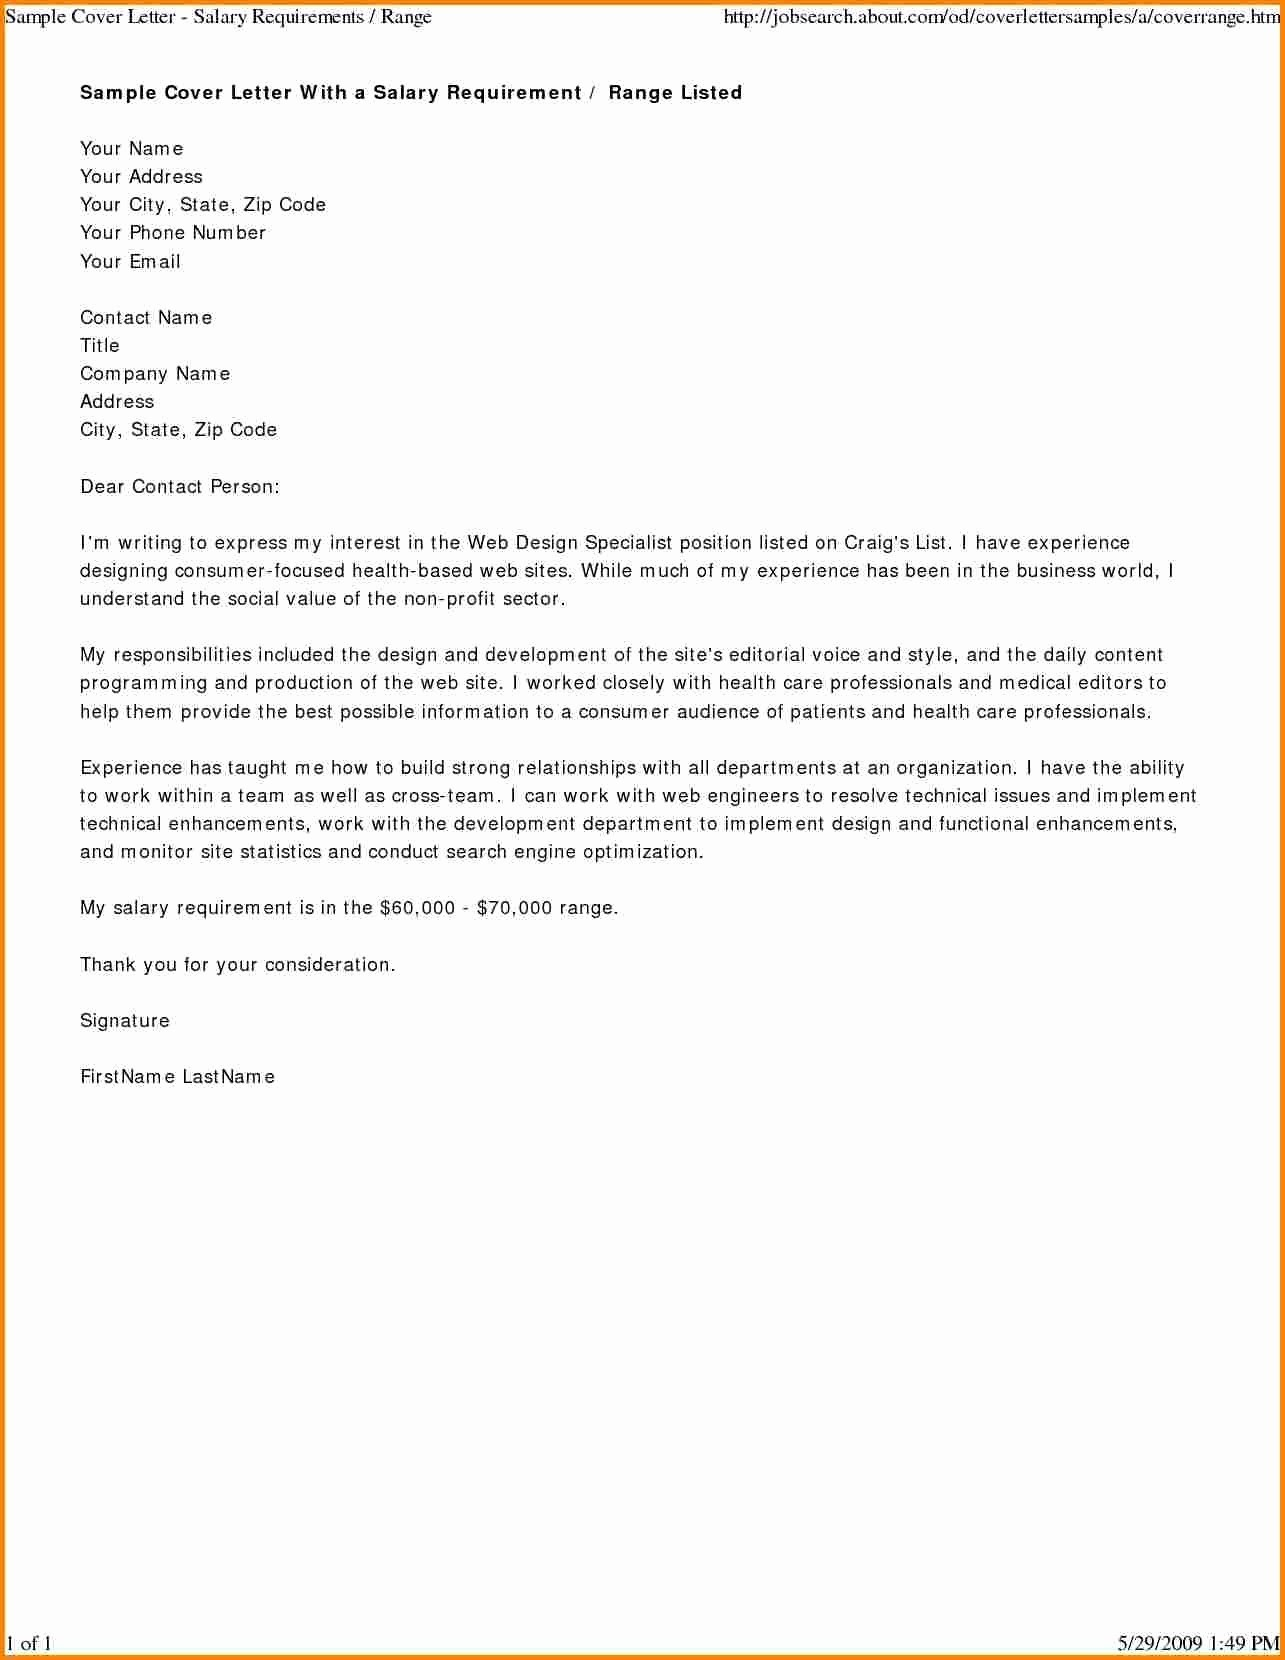 Independent Contractor Offer Letter Template - Job Agreement Letter Valid Time and Materials Contract Template Best